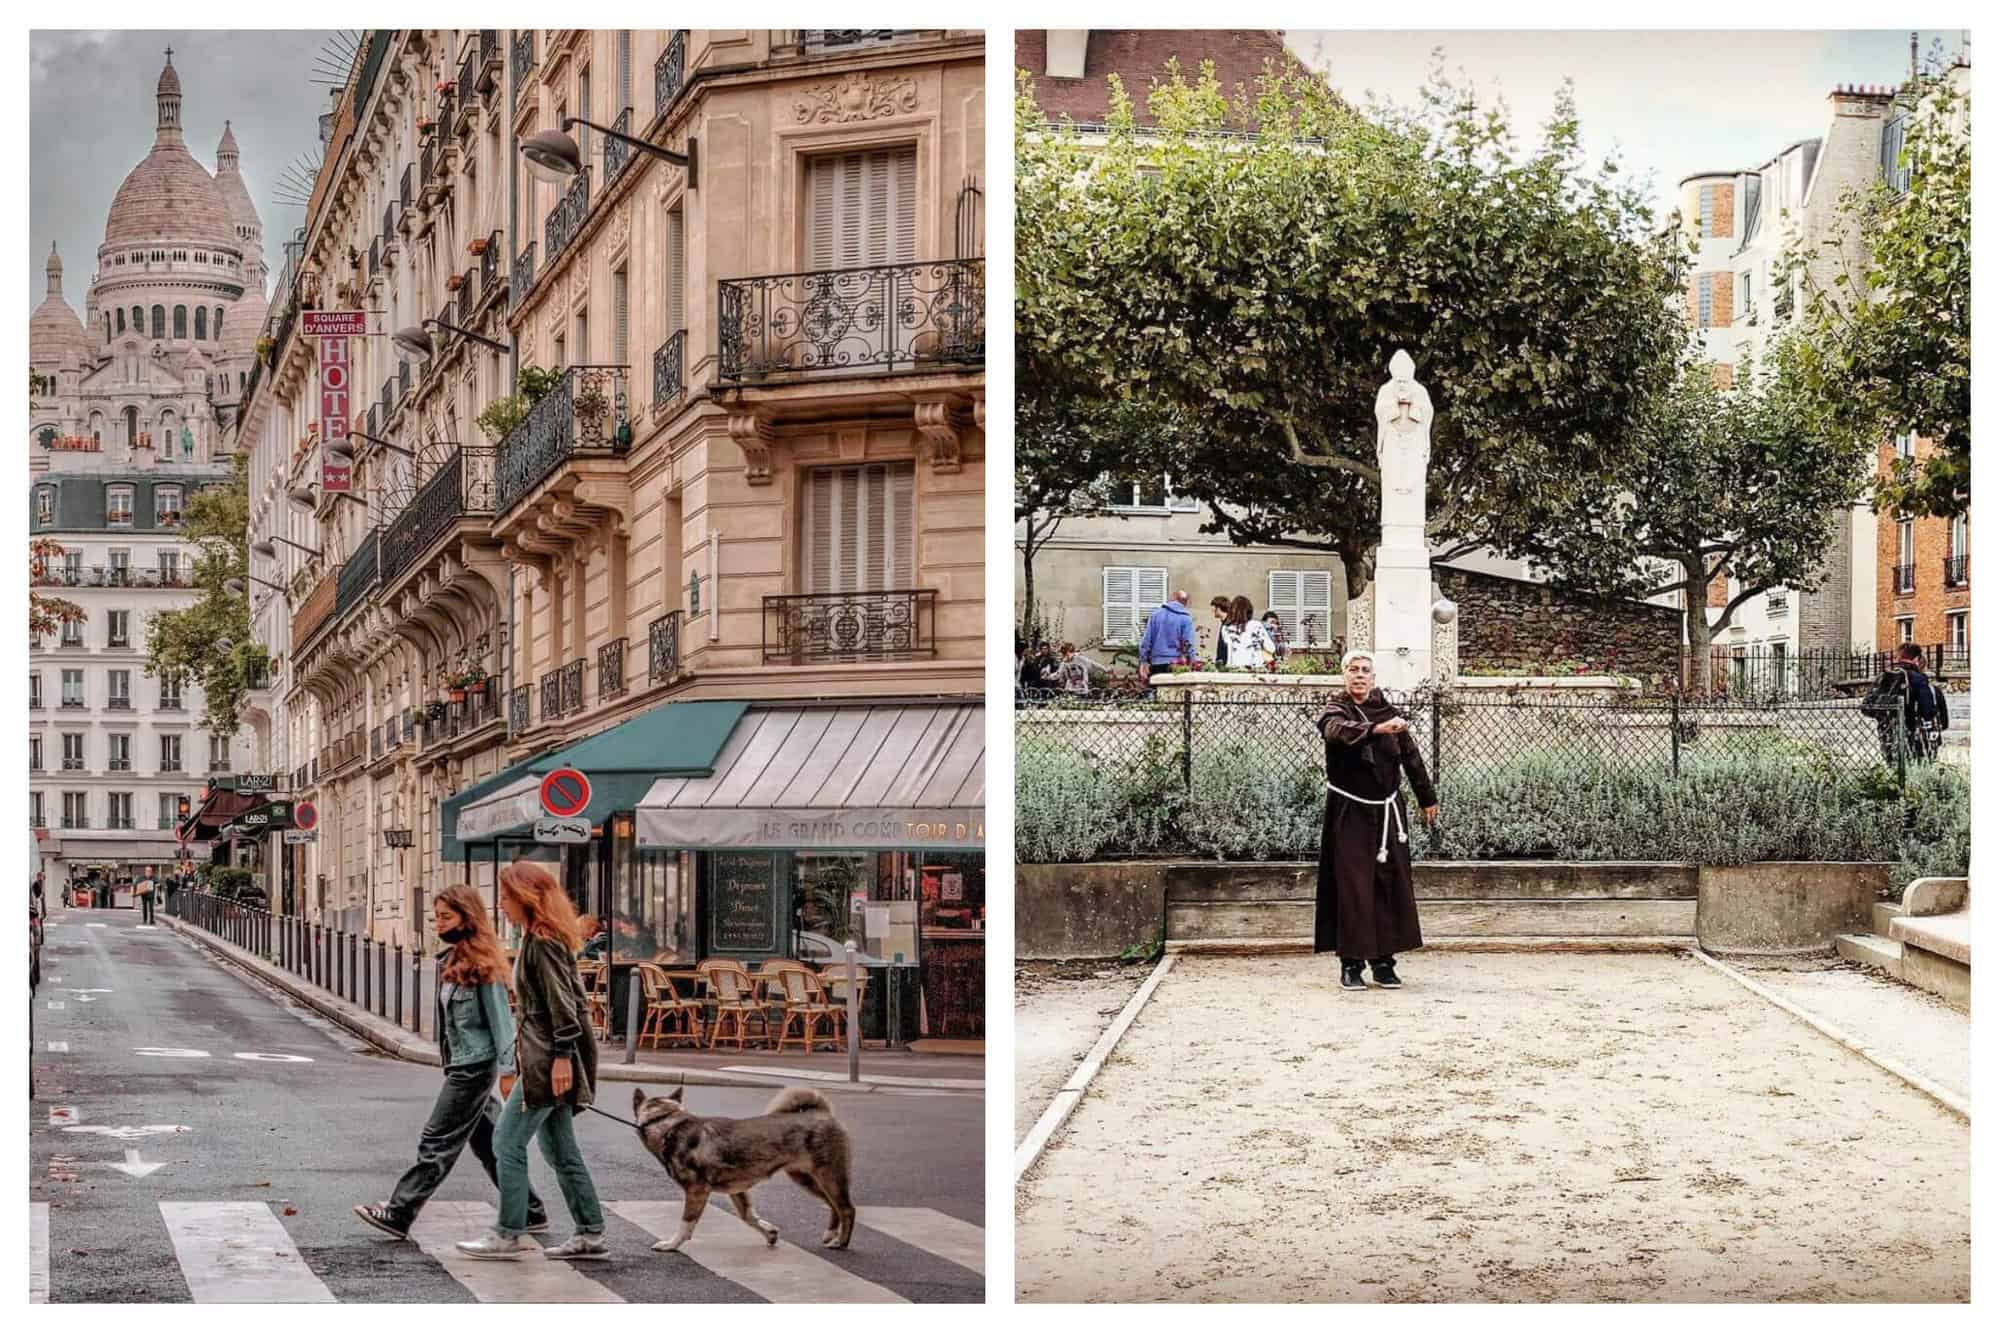 Two ladies and their dog walk by Place d'Anvers with the Sacré Cœur in the background. A monk throws a boule as he plays Pétanque at Square Suzanne-Buisson.